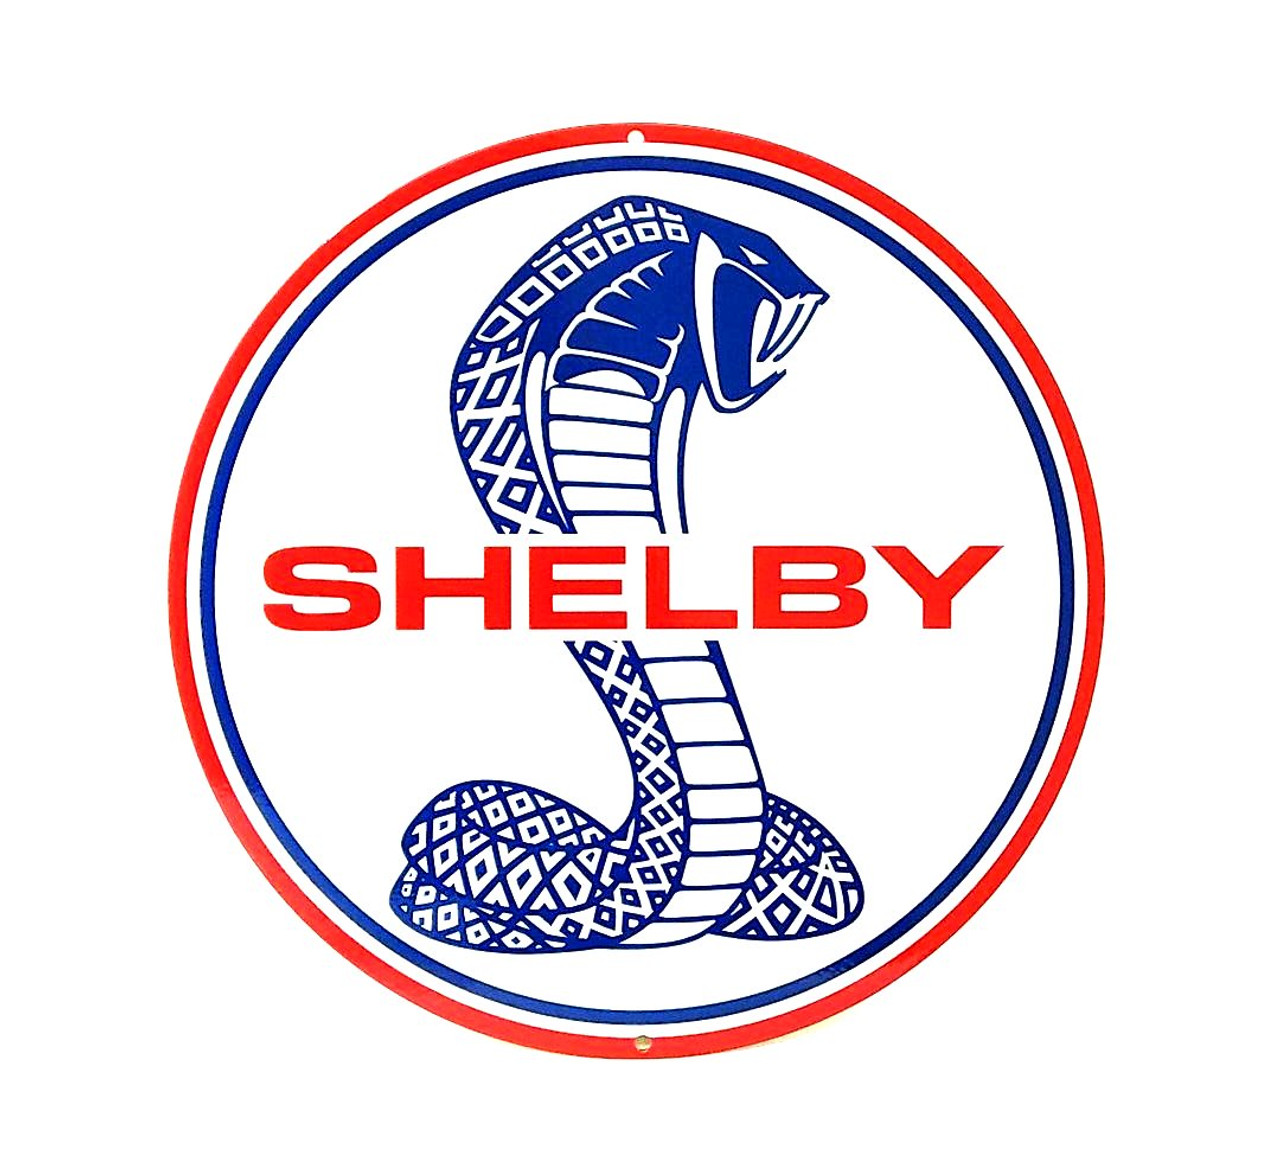 Shelby Cobra with Red Vintage Circular Metal Sign